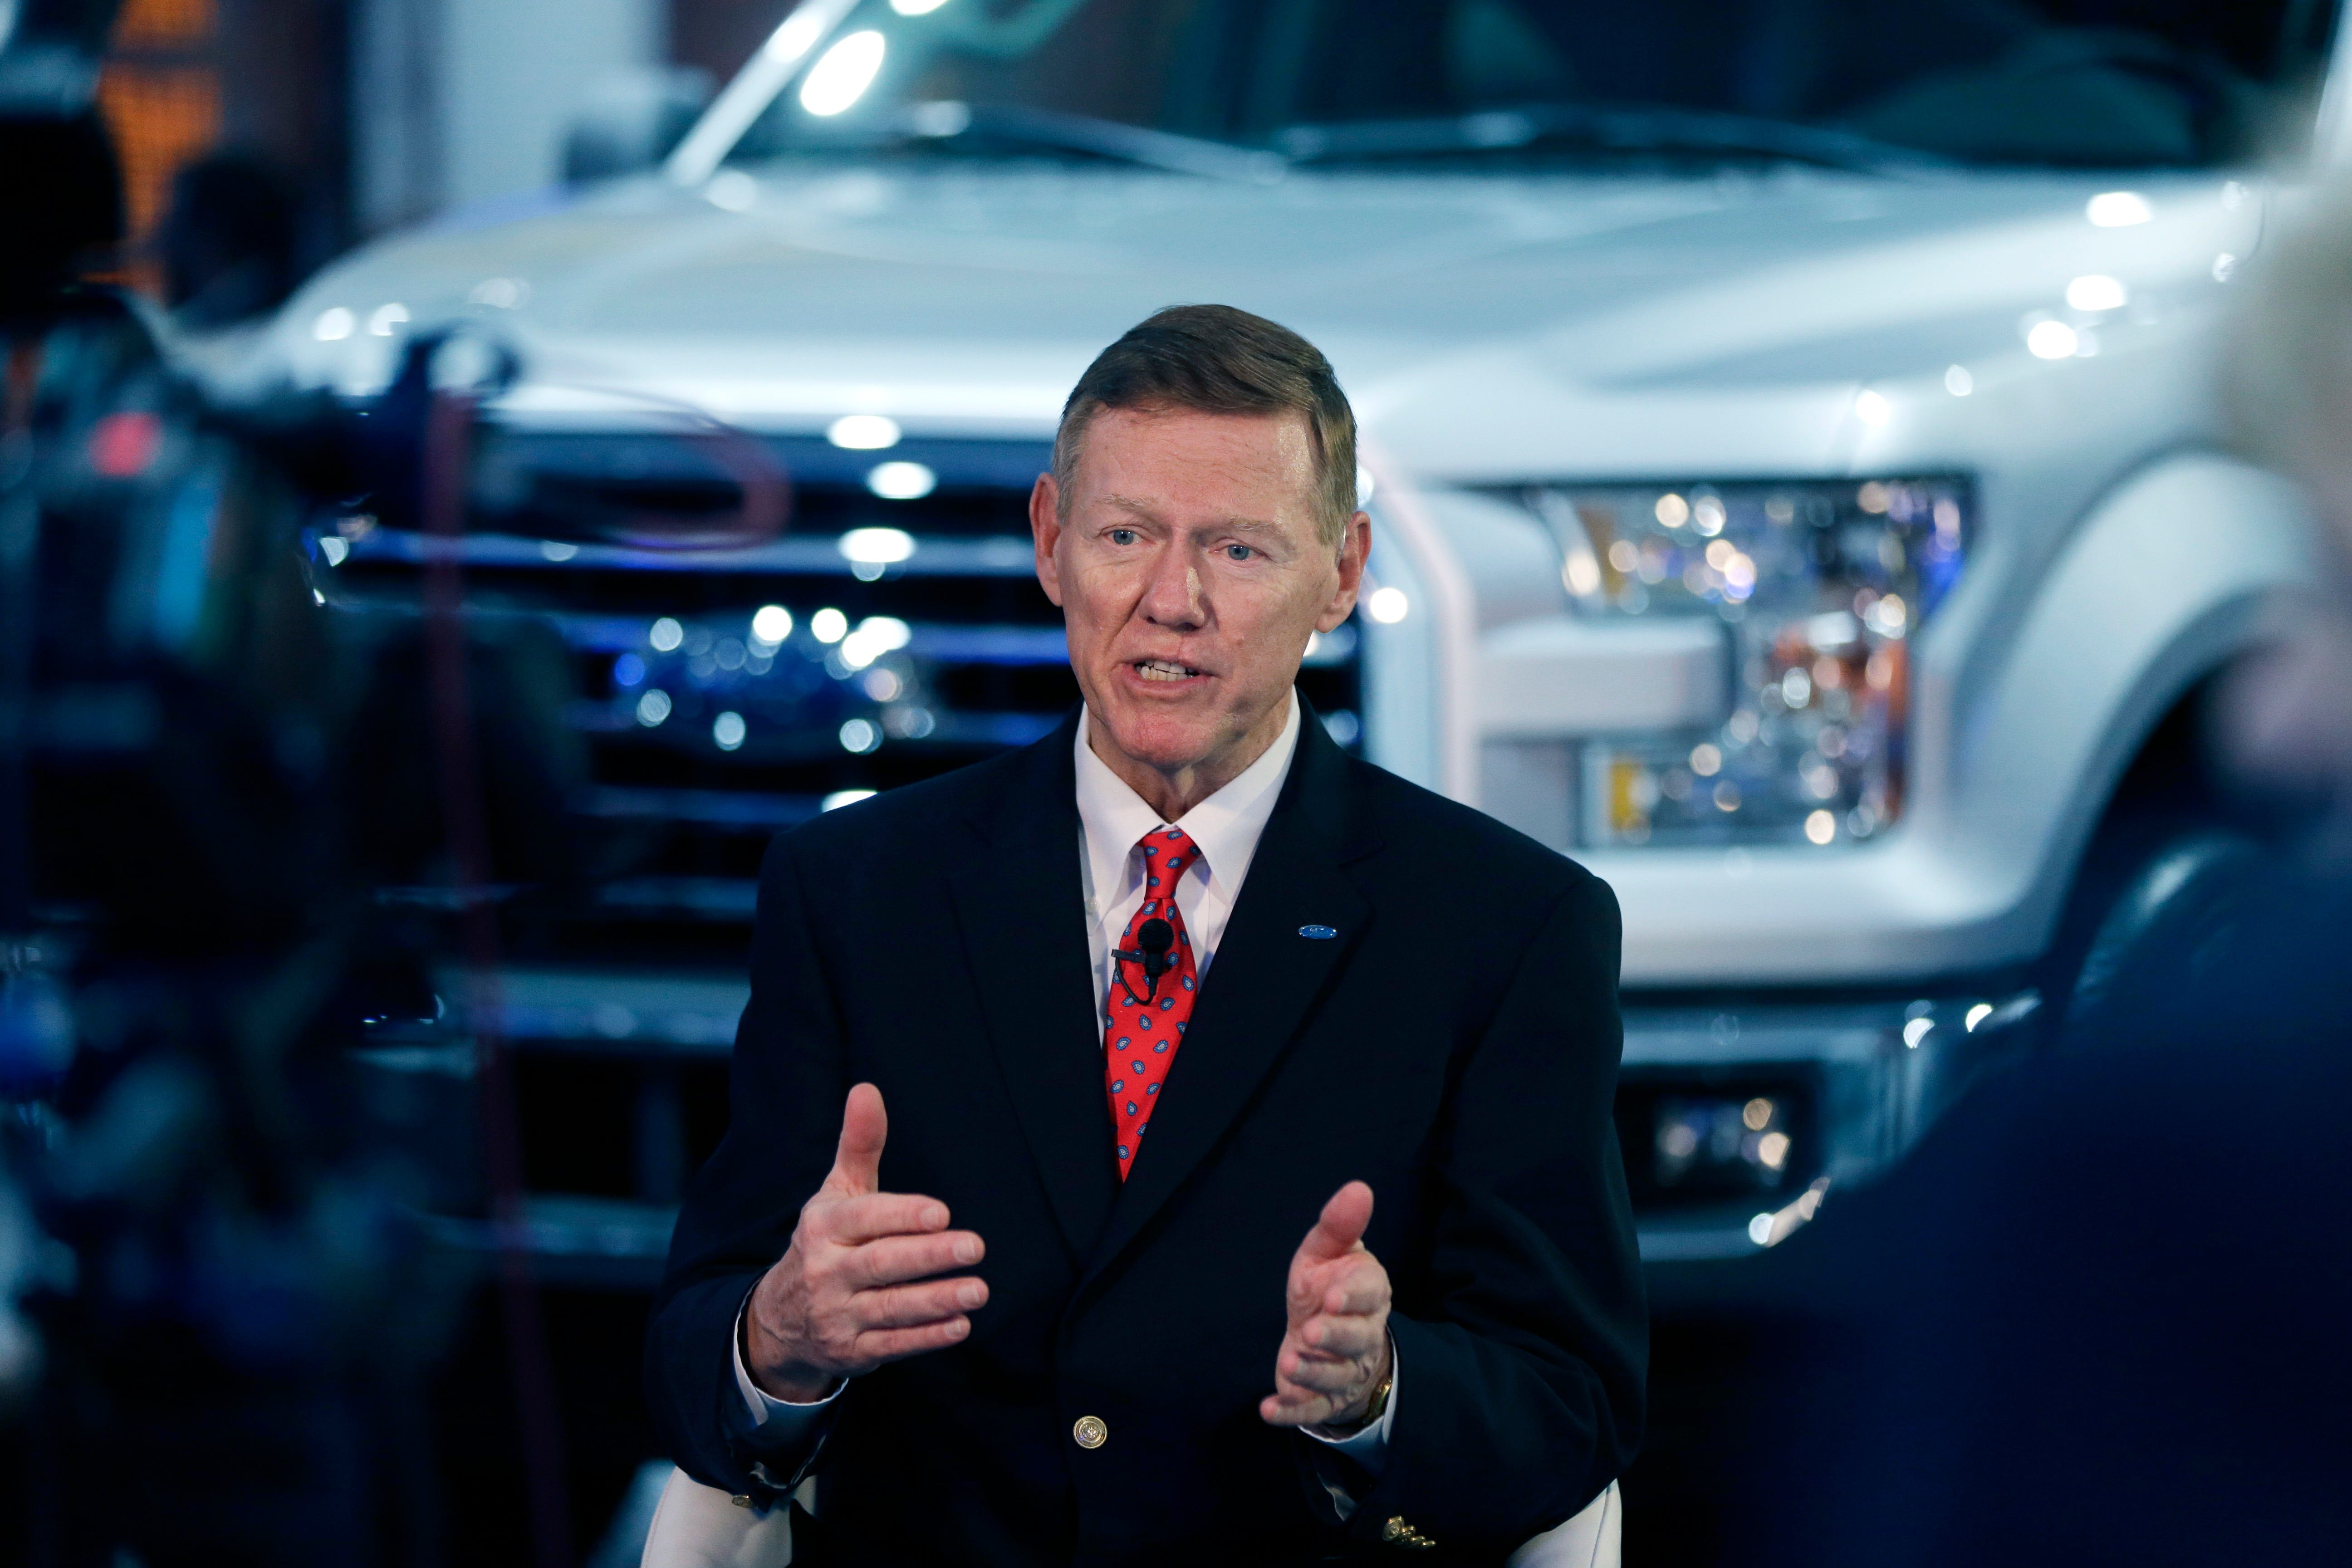 Alan Mulally, President and CEO of the Ford Motor Co., is interviewed at the North American International Auto Show in Detroit, Monday, Jan. 13, 2014. (AP Photo/Carlos Osorio)